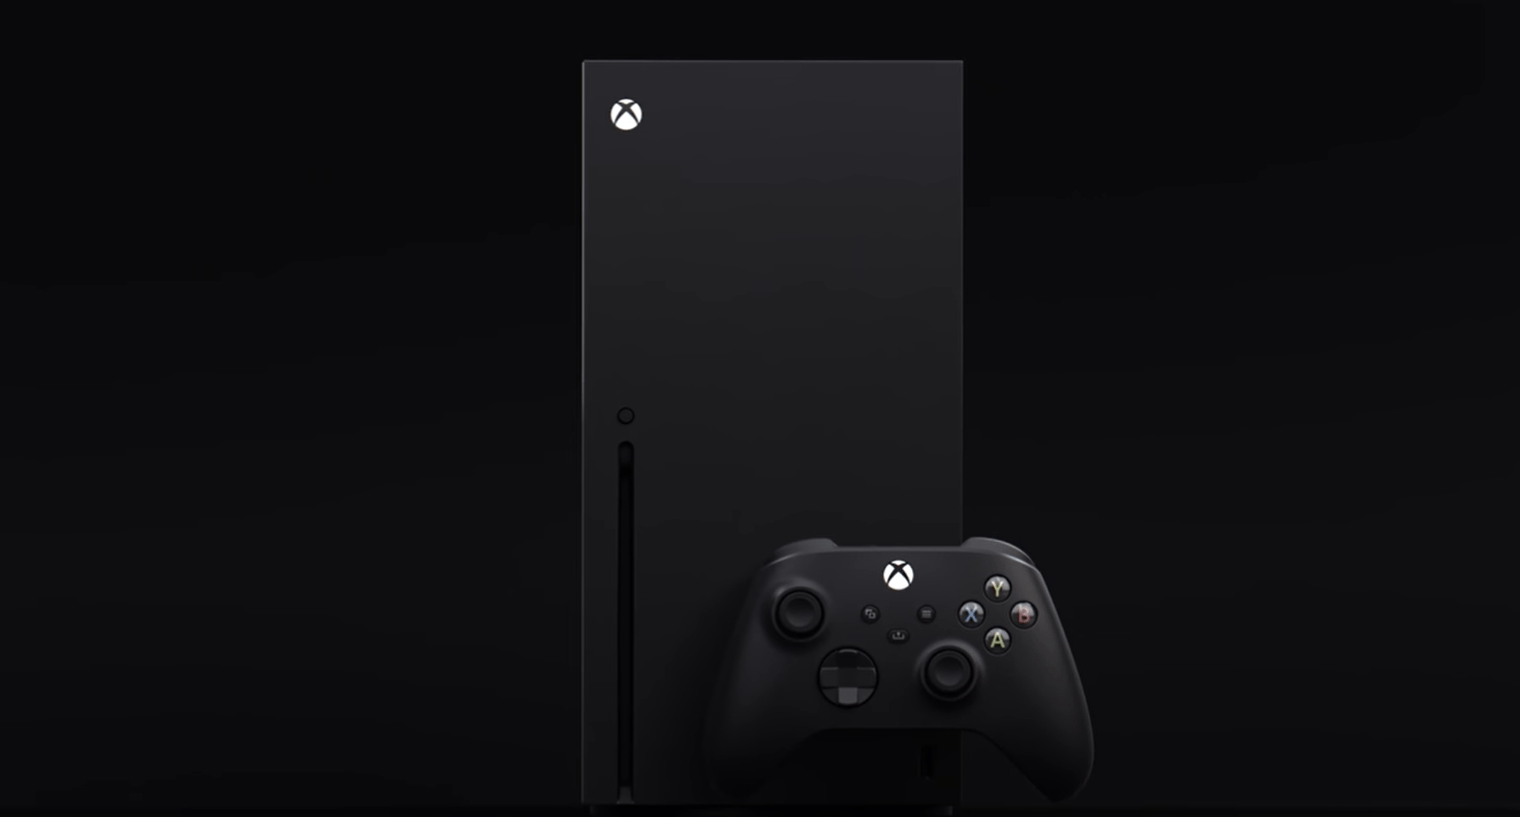 The Stand On The Xbox Series X Cannot Be Removed, But There Is A Good Reason For It